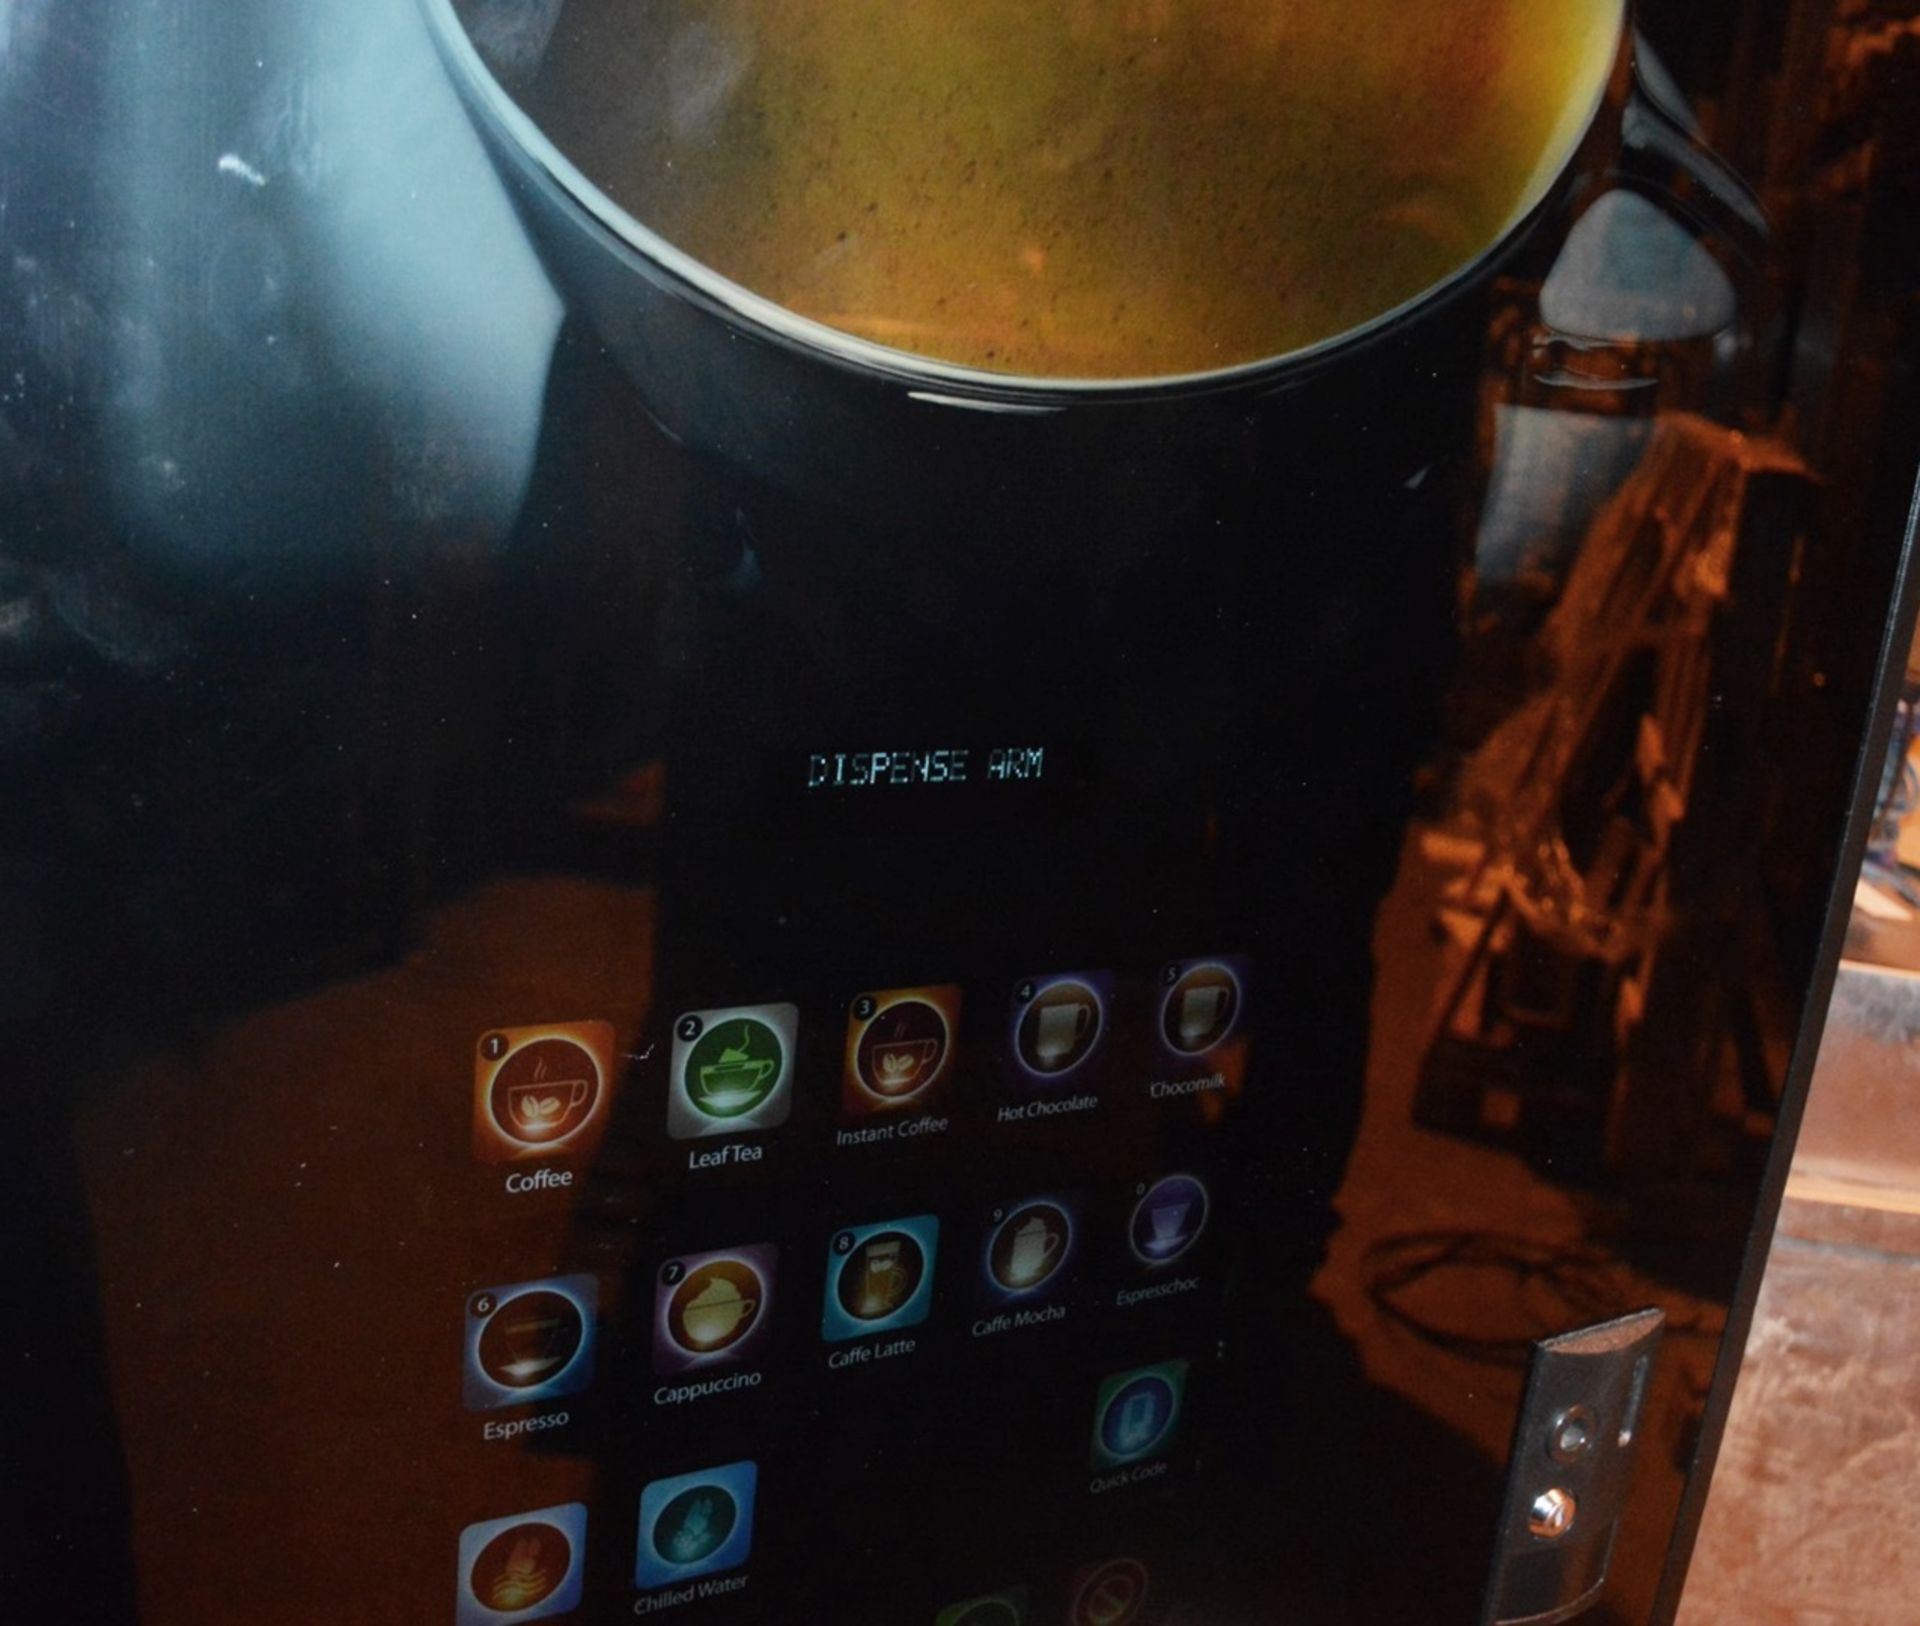 1 x Coffeetek Touch Screen Instant Bean to Cup Fresh Coffee and Leaf Tea Vending Machine - Model: - Image 7 of 9